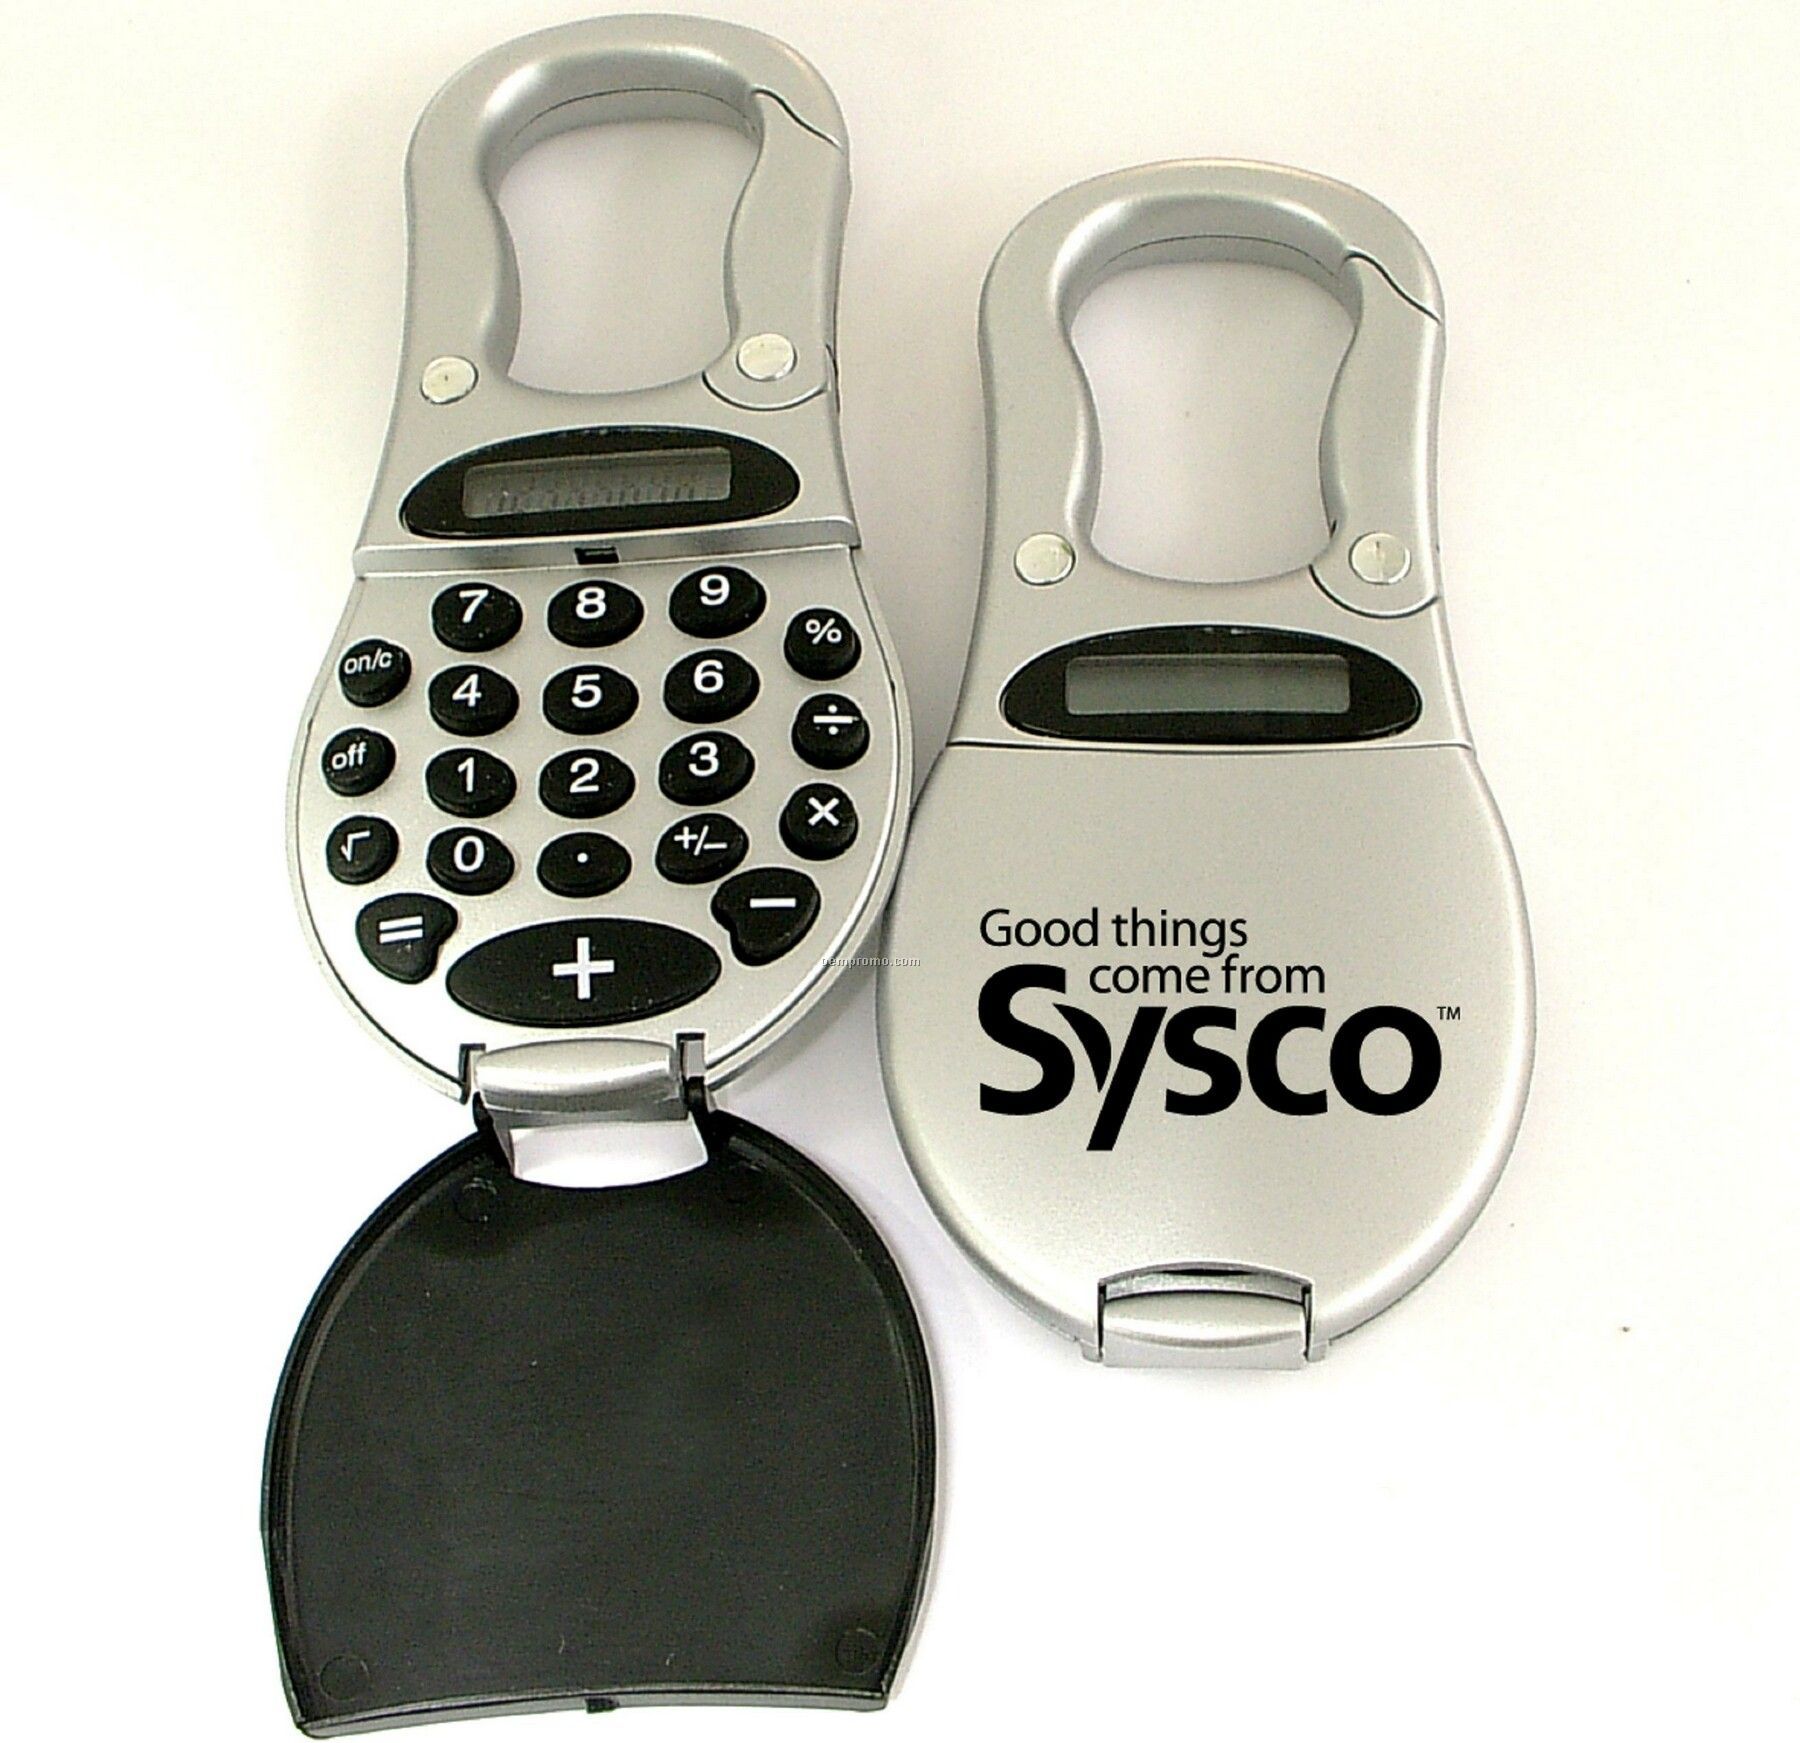 Carabiner Key Chain With 8 Digit Calculator. Large Flip Cover Lid Is An Ide